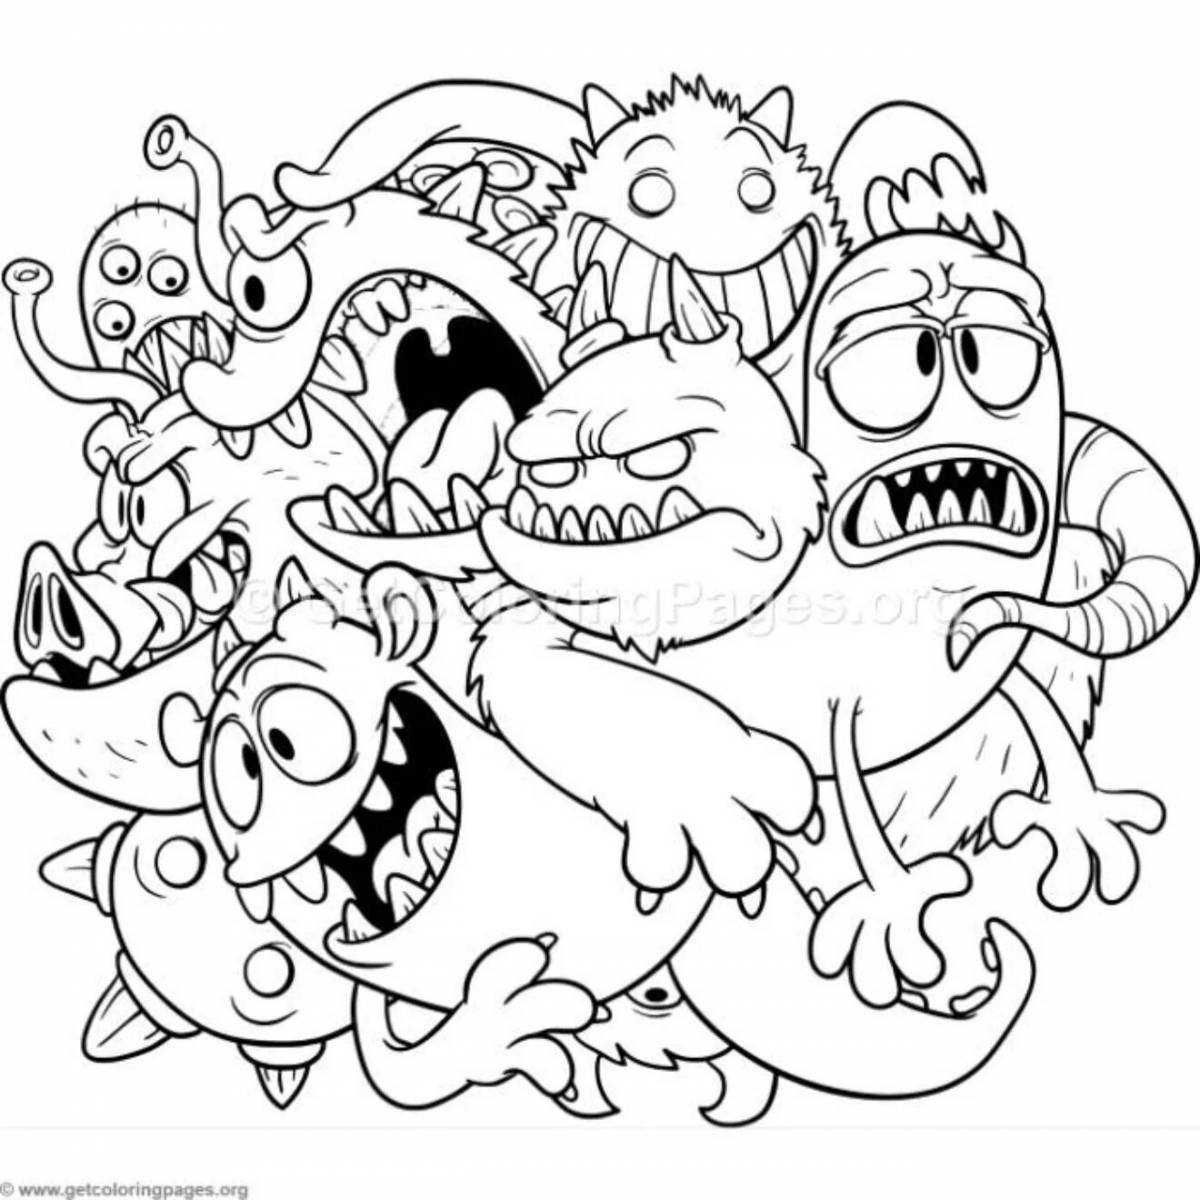 Coloring pages monsters for children 6-7 years old